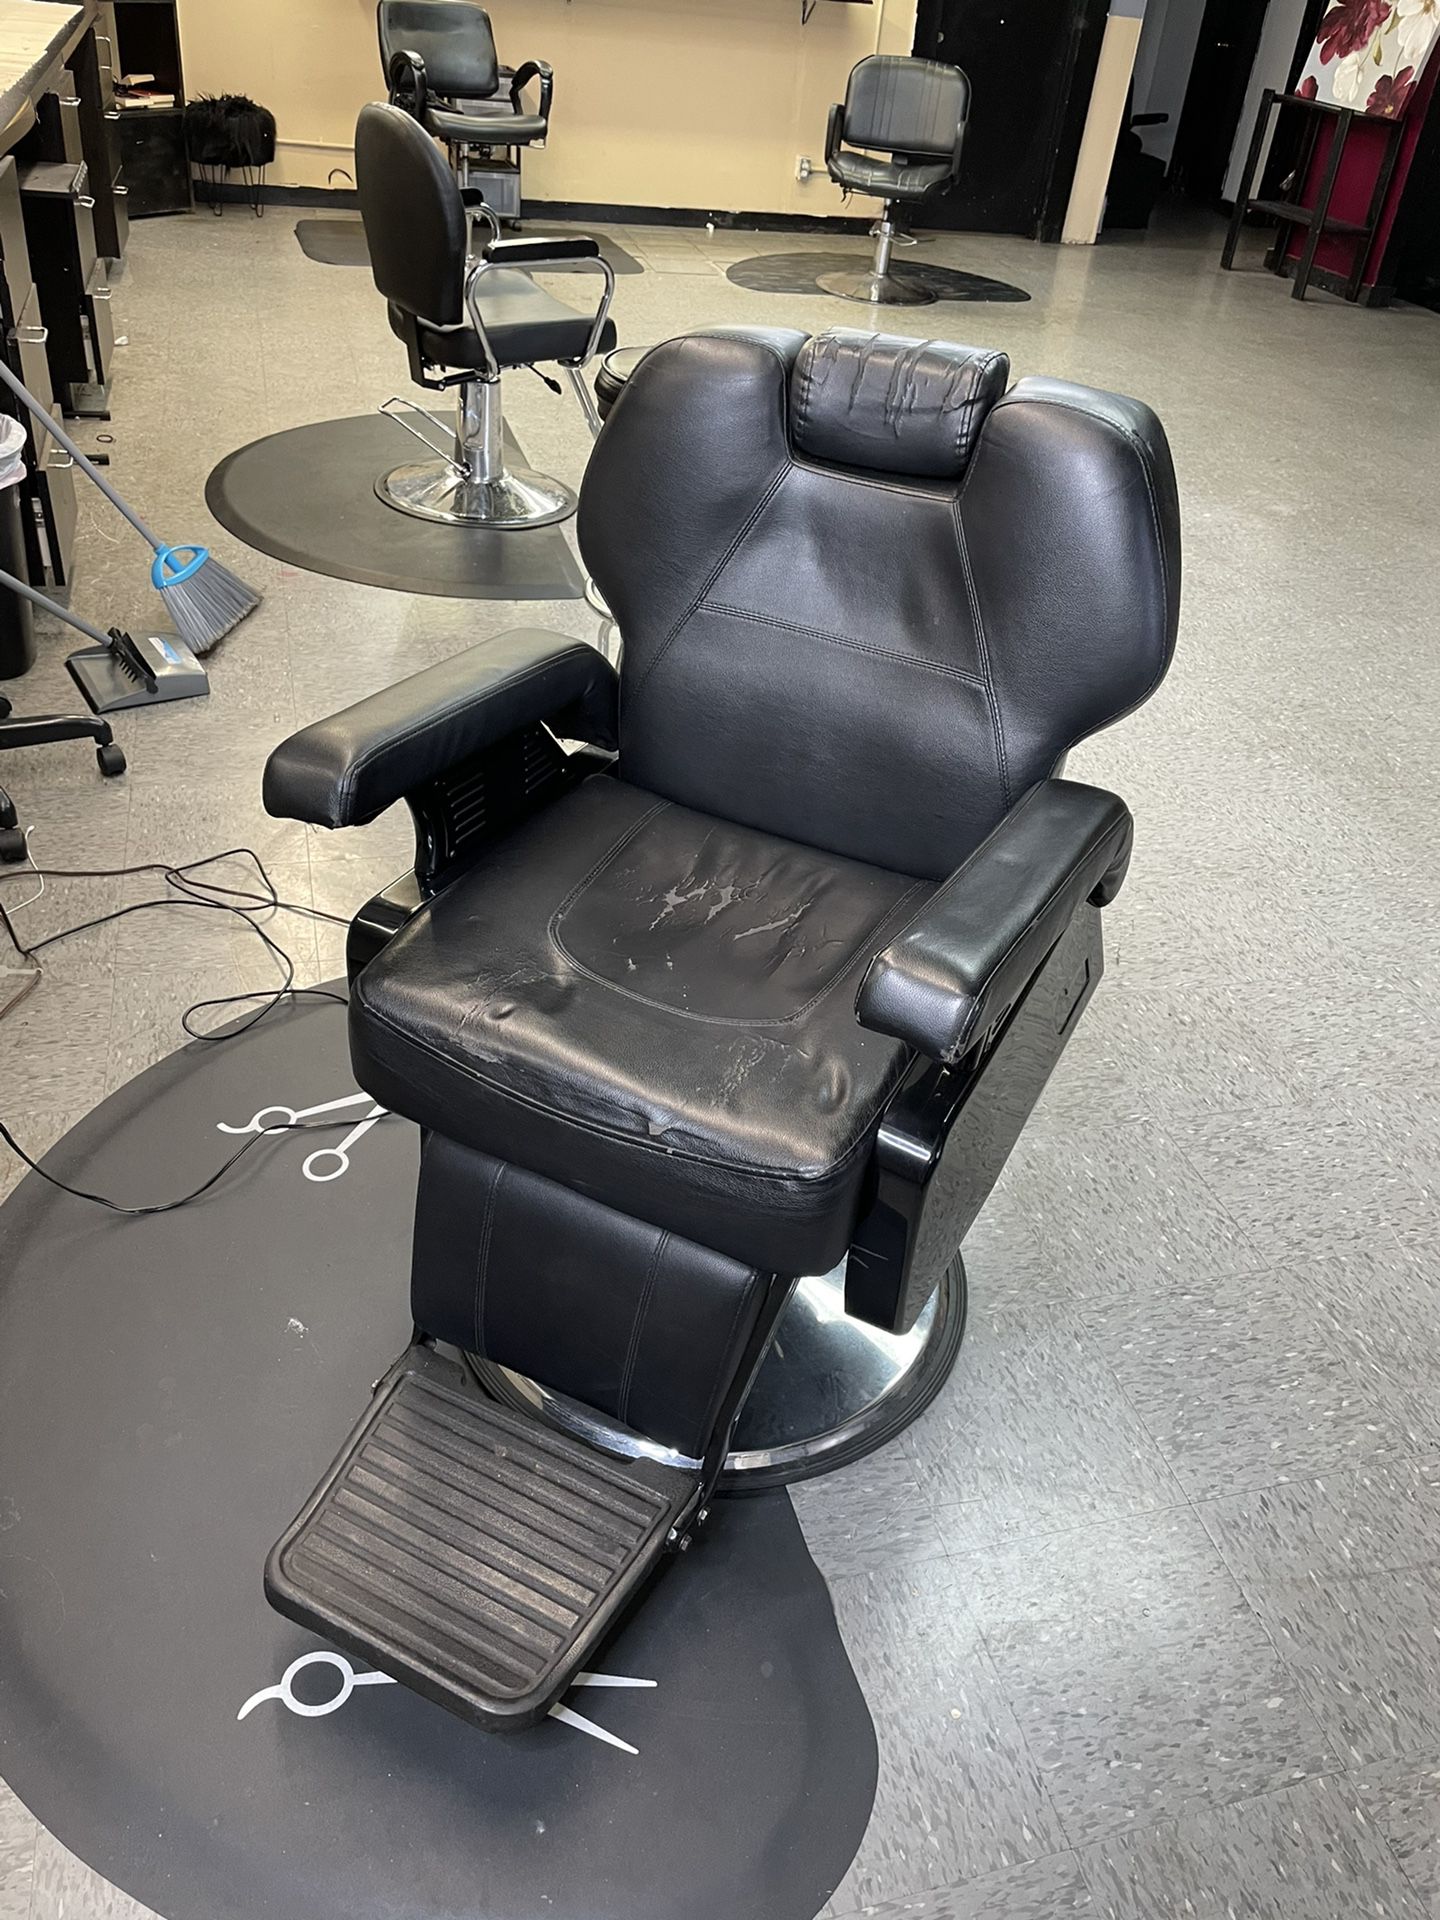 Used Barber Chair ! Still In Good Condition .. No Longer Needing It .